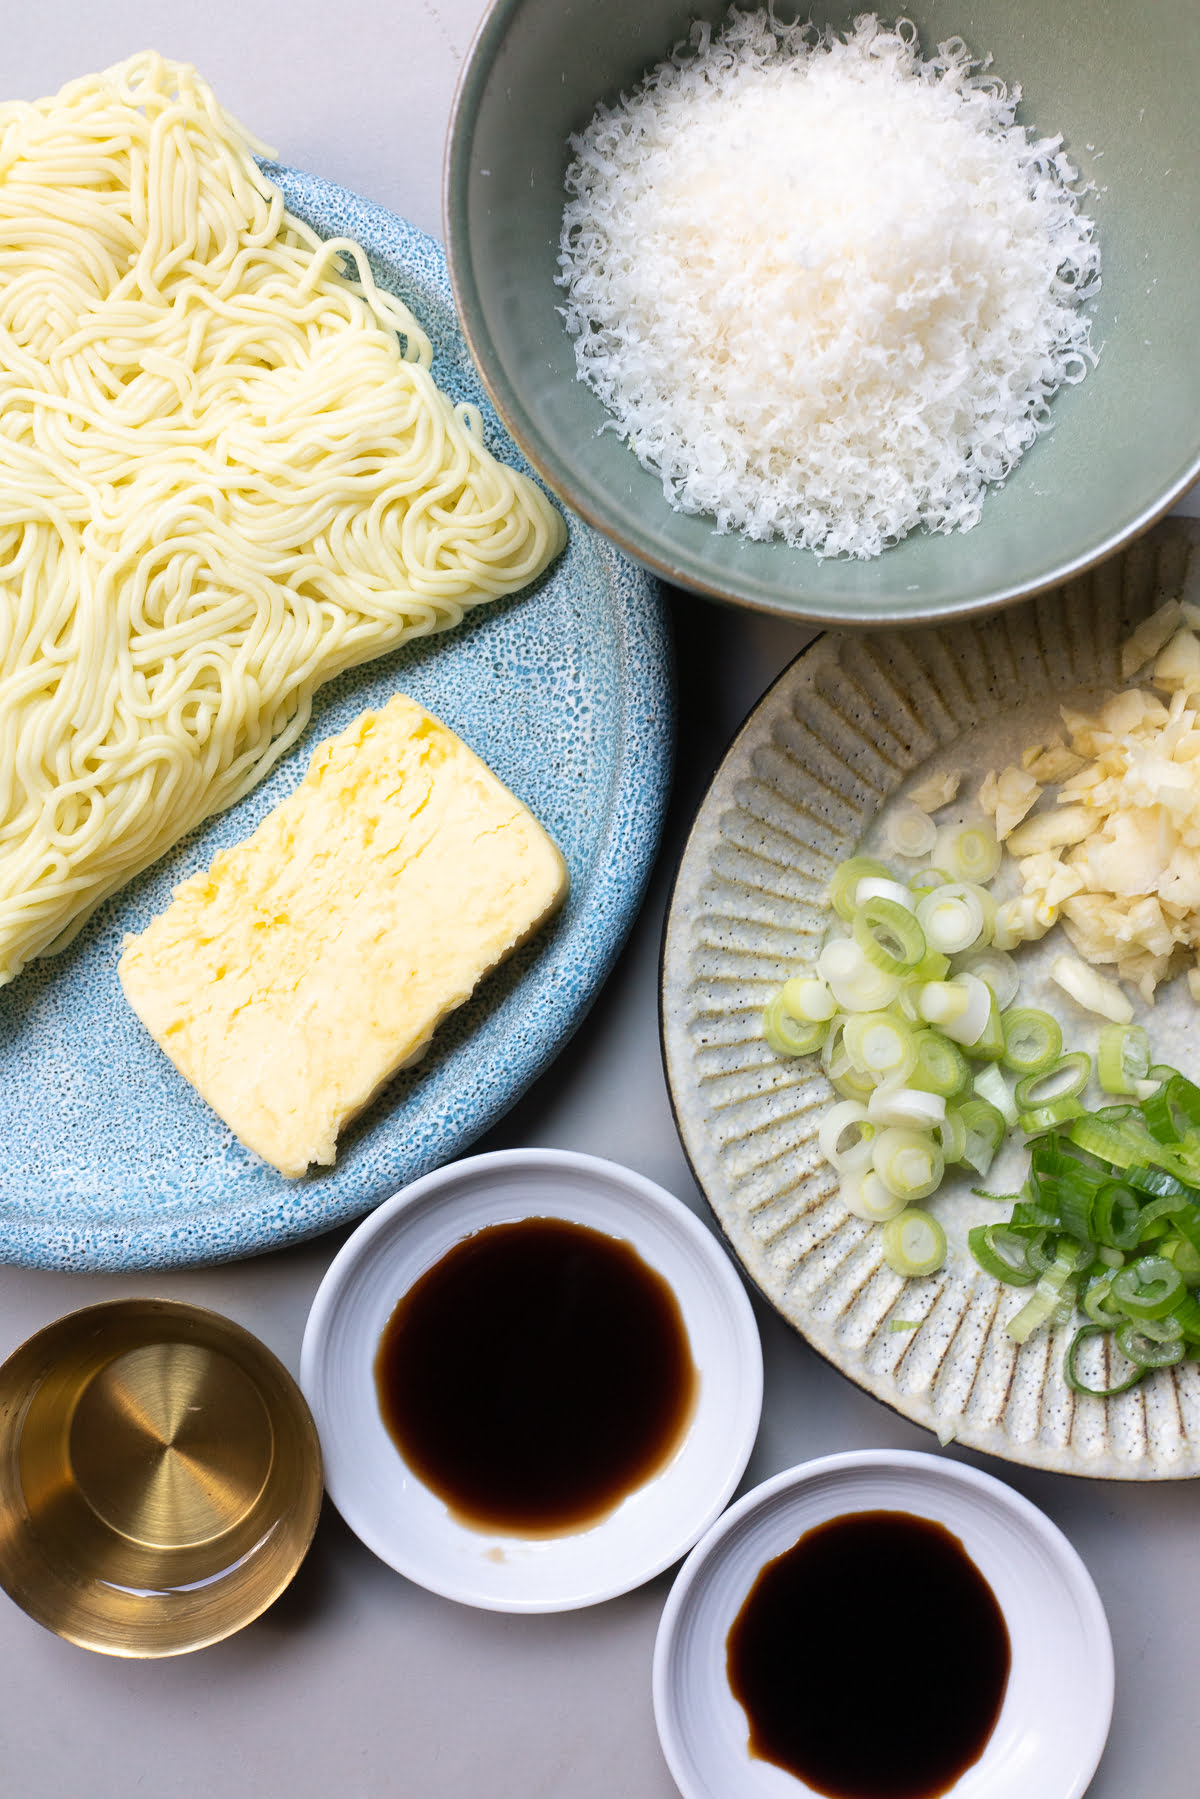 Ingredients for garlic noodles: yakisoba, butter, parmesann, garlic, green onions, mirin, soy sauce, and Maggi sauce.